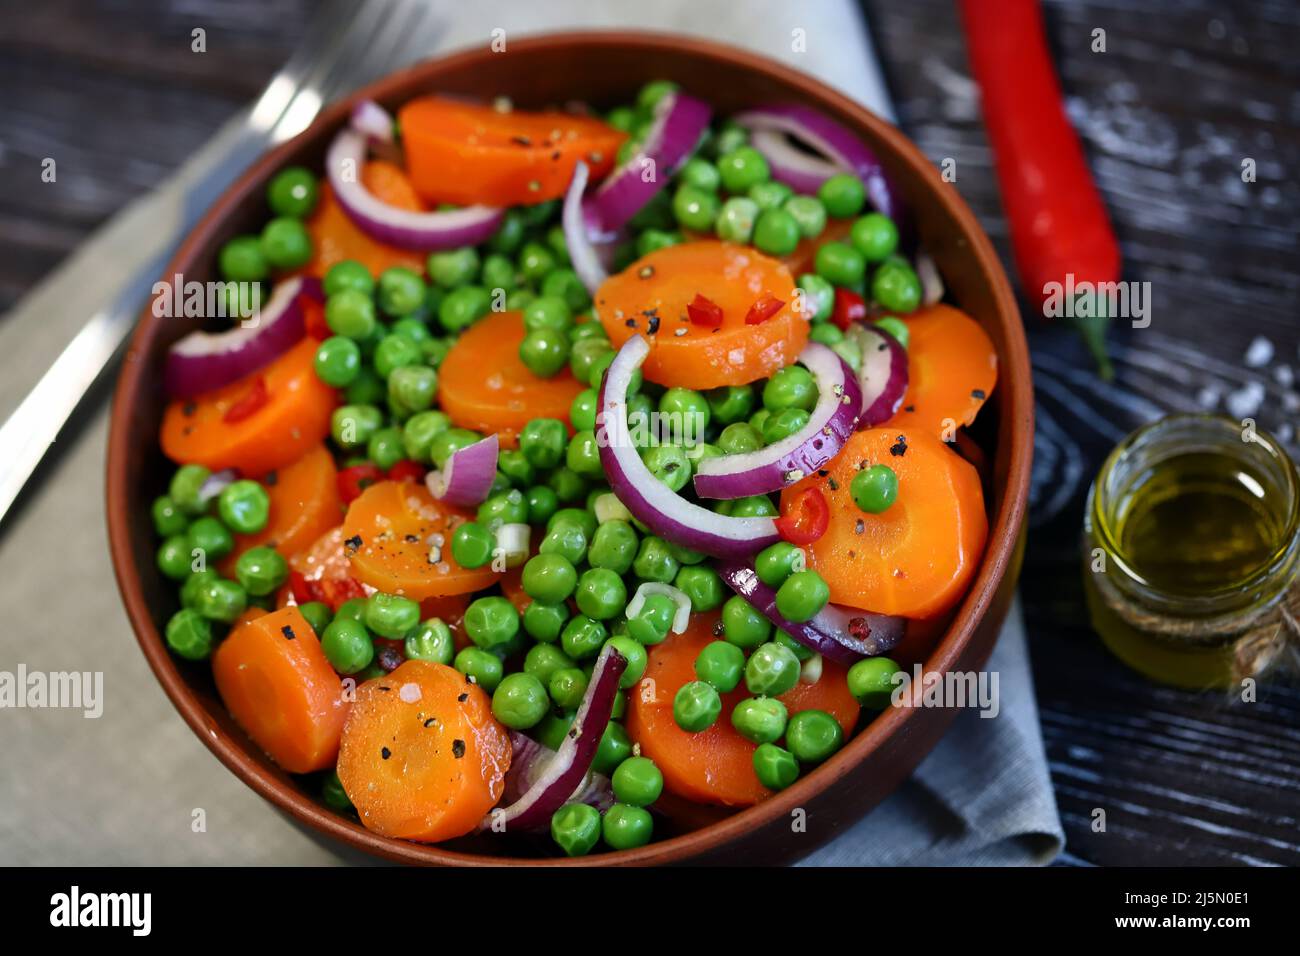 Healthy salad bowl with green peas, carrots and blue onions. Diet food. Fitness salad. Stock Photo